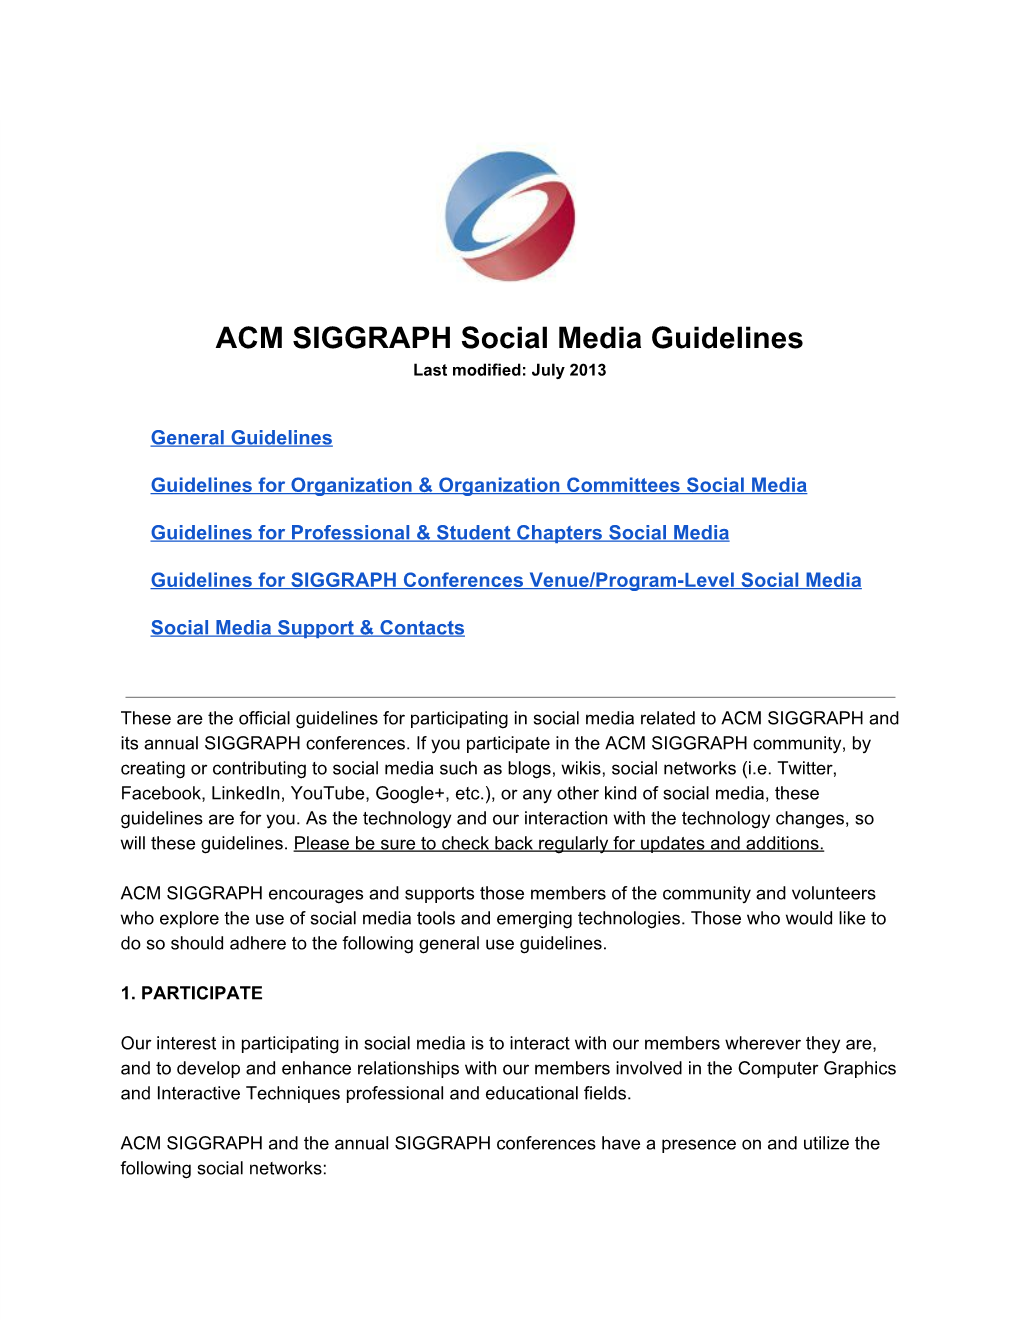 ACM SIGGRAPH Social Media Guidelines for Chapters